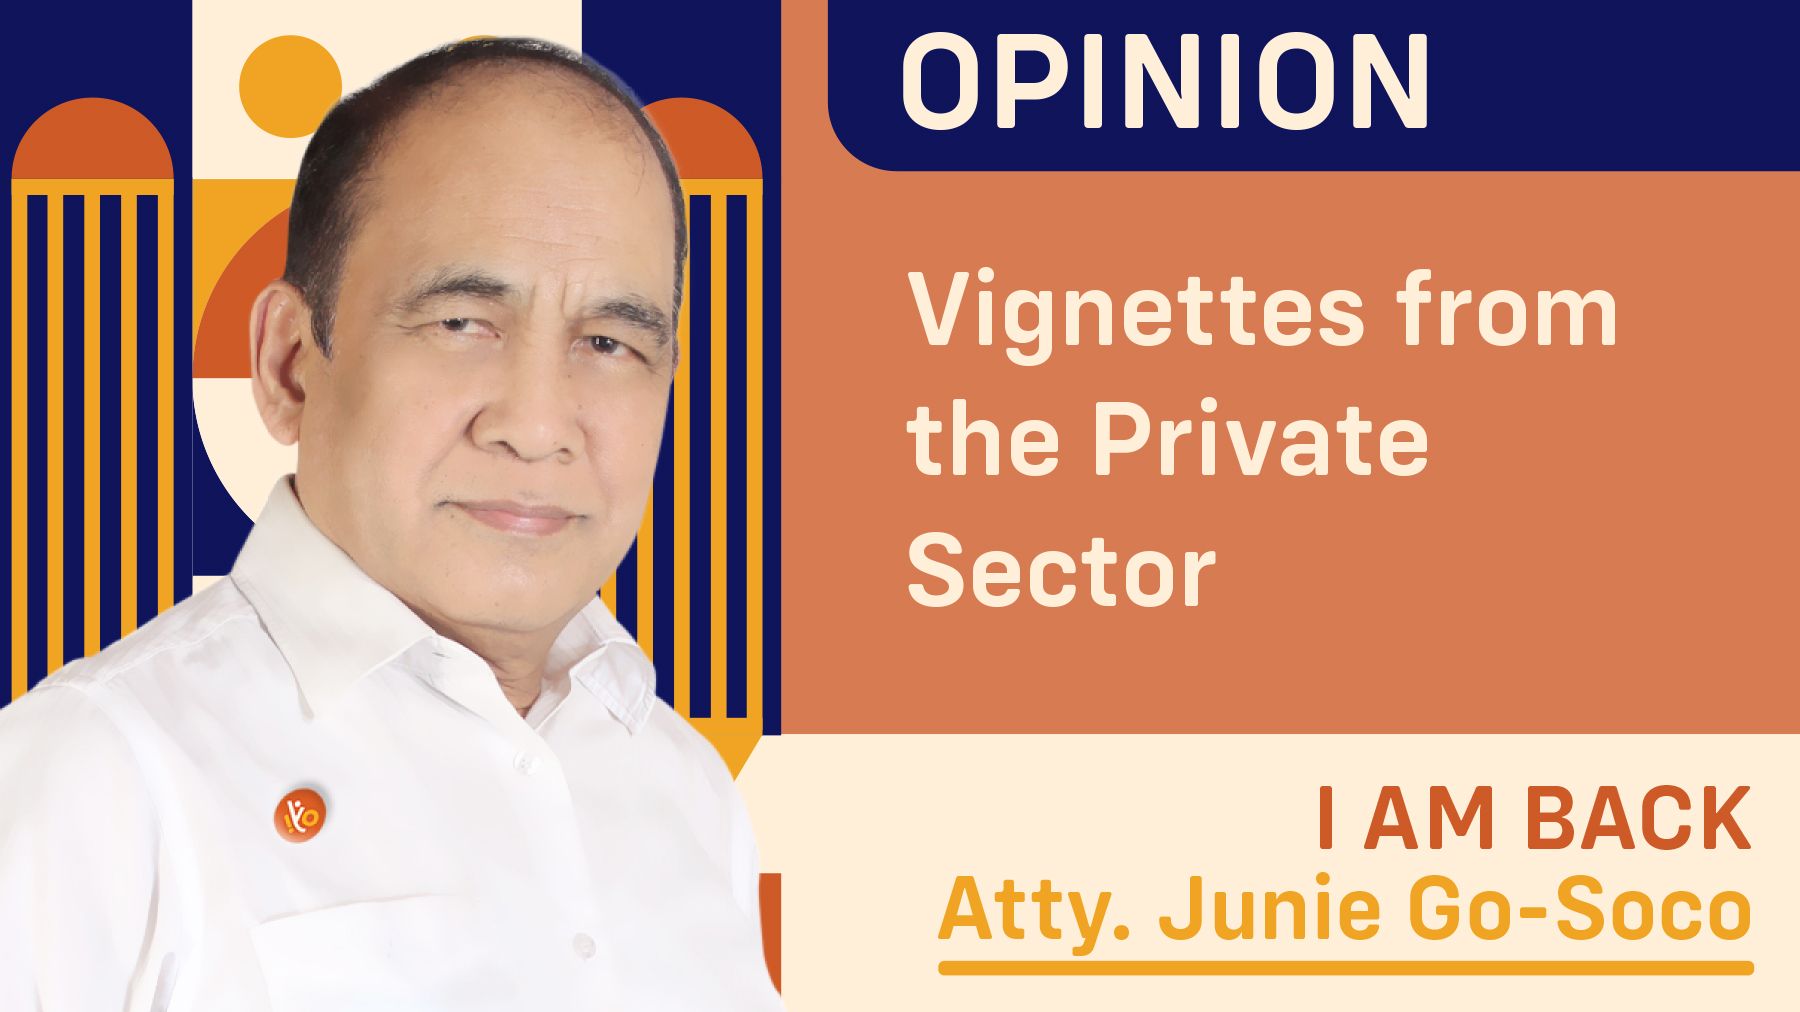 Vignettes from the Private Sector